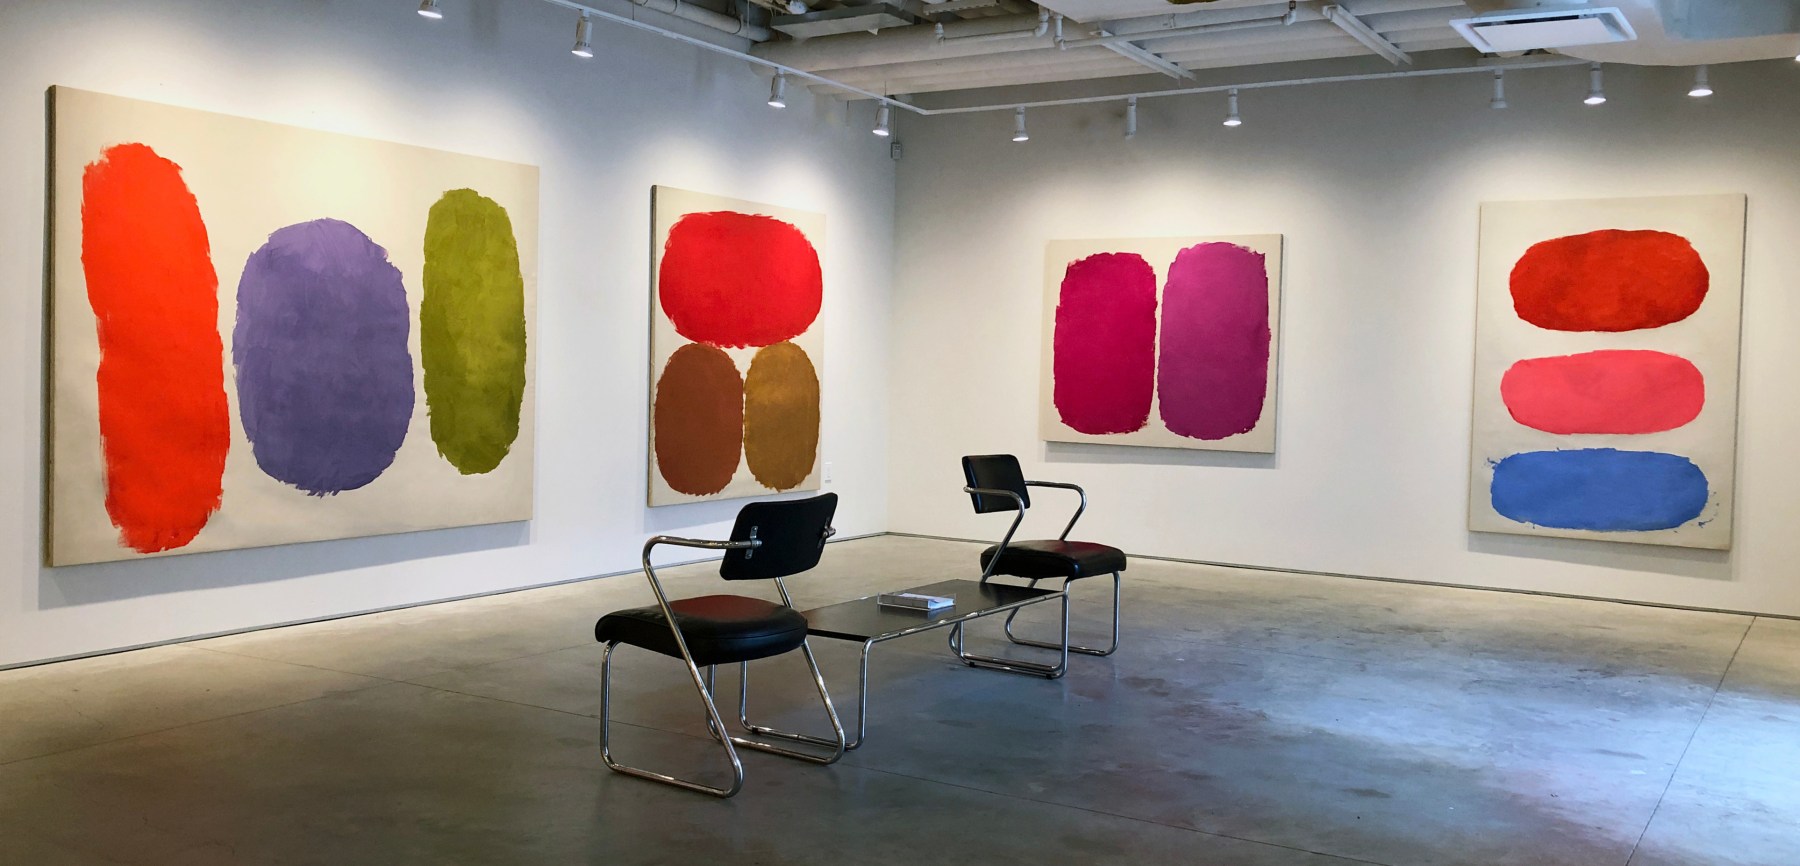 Four paintings by Ray Parker with colors of yellow, orange, umber, yellow ochre, violet, pink, blue, and red installed on a white wall.  Black table and two chairs are positioned in the middle of the room.